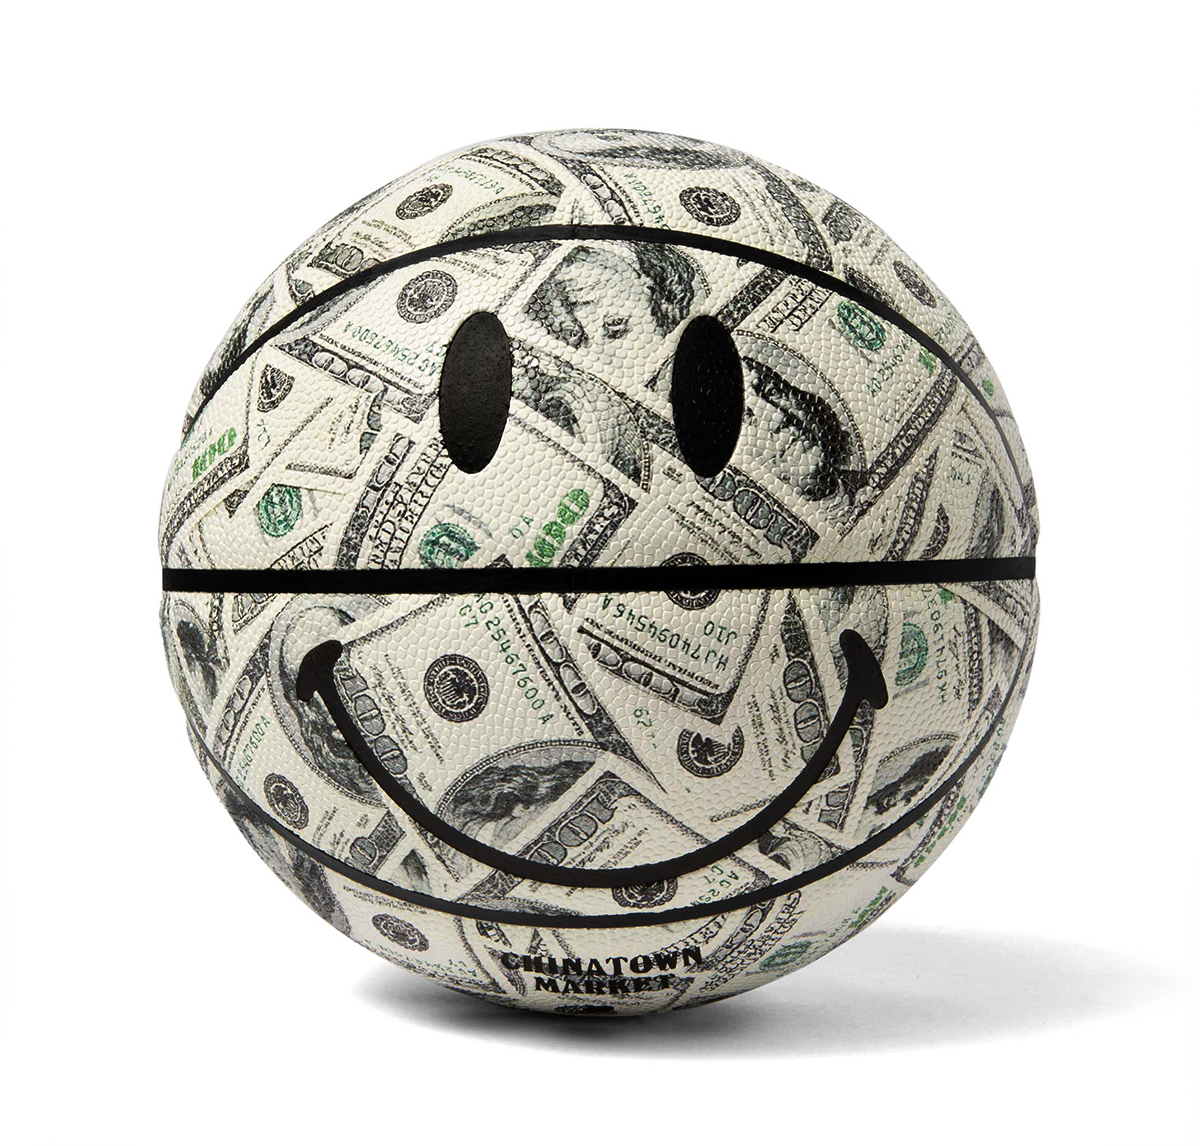 Chinatown Market Smiley Money Basketball - Size 7 front